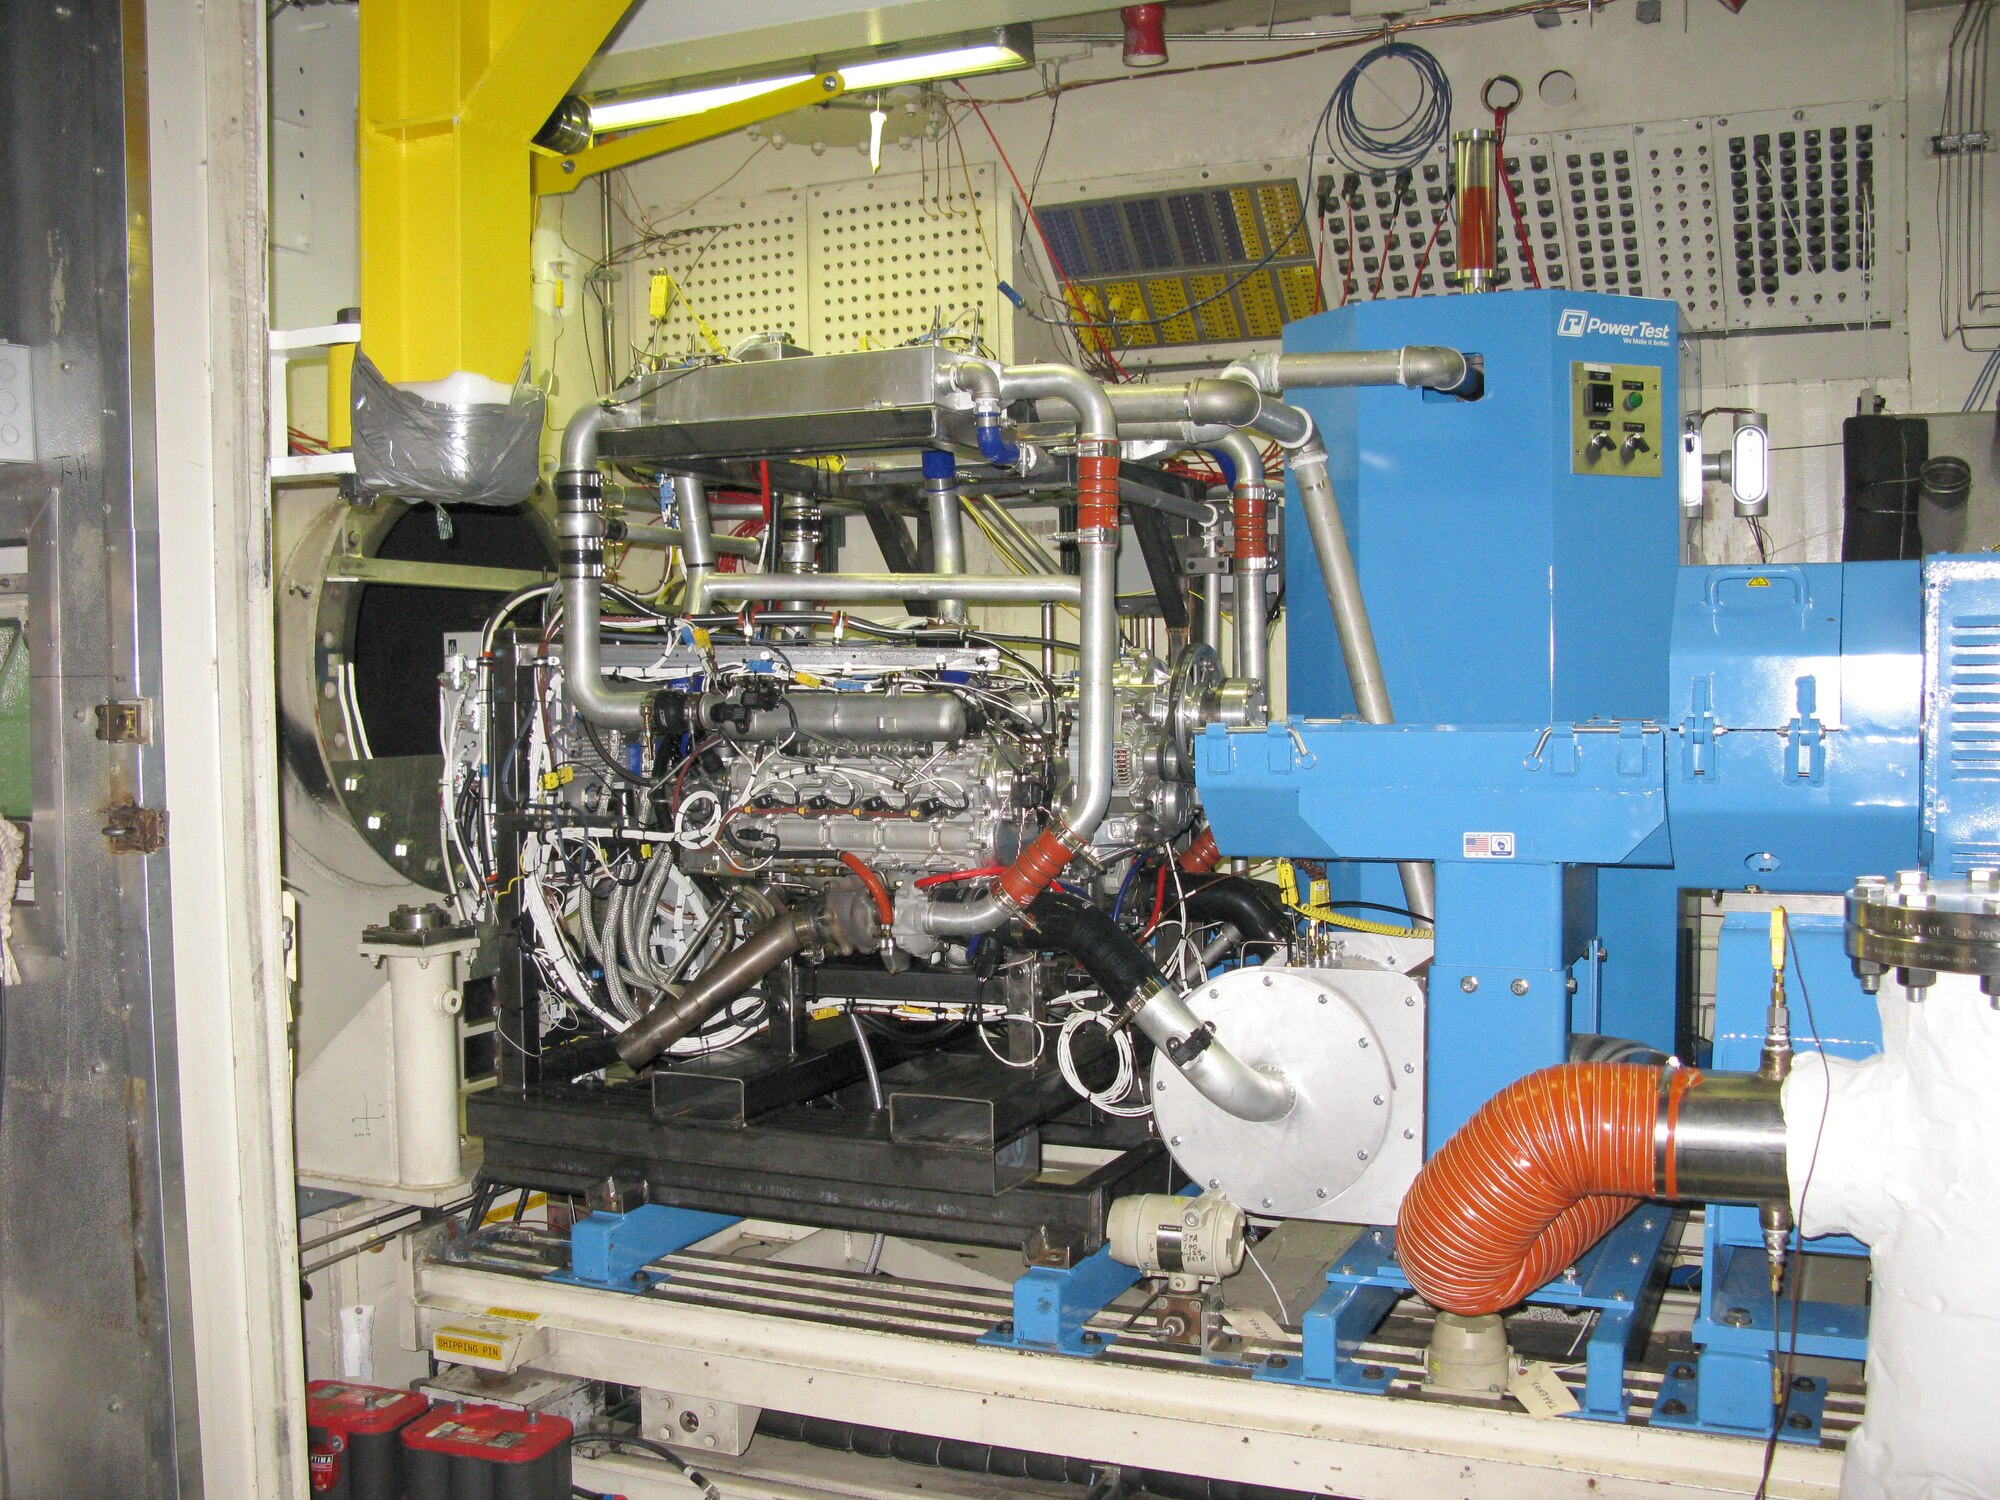 AEDC test facility resurrected for AFRL-sponsored testing of high-efficiency, diesel engine